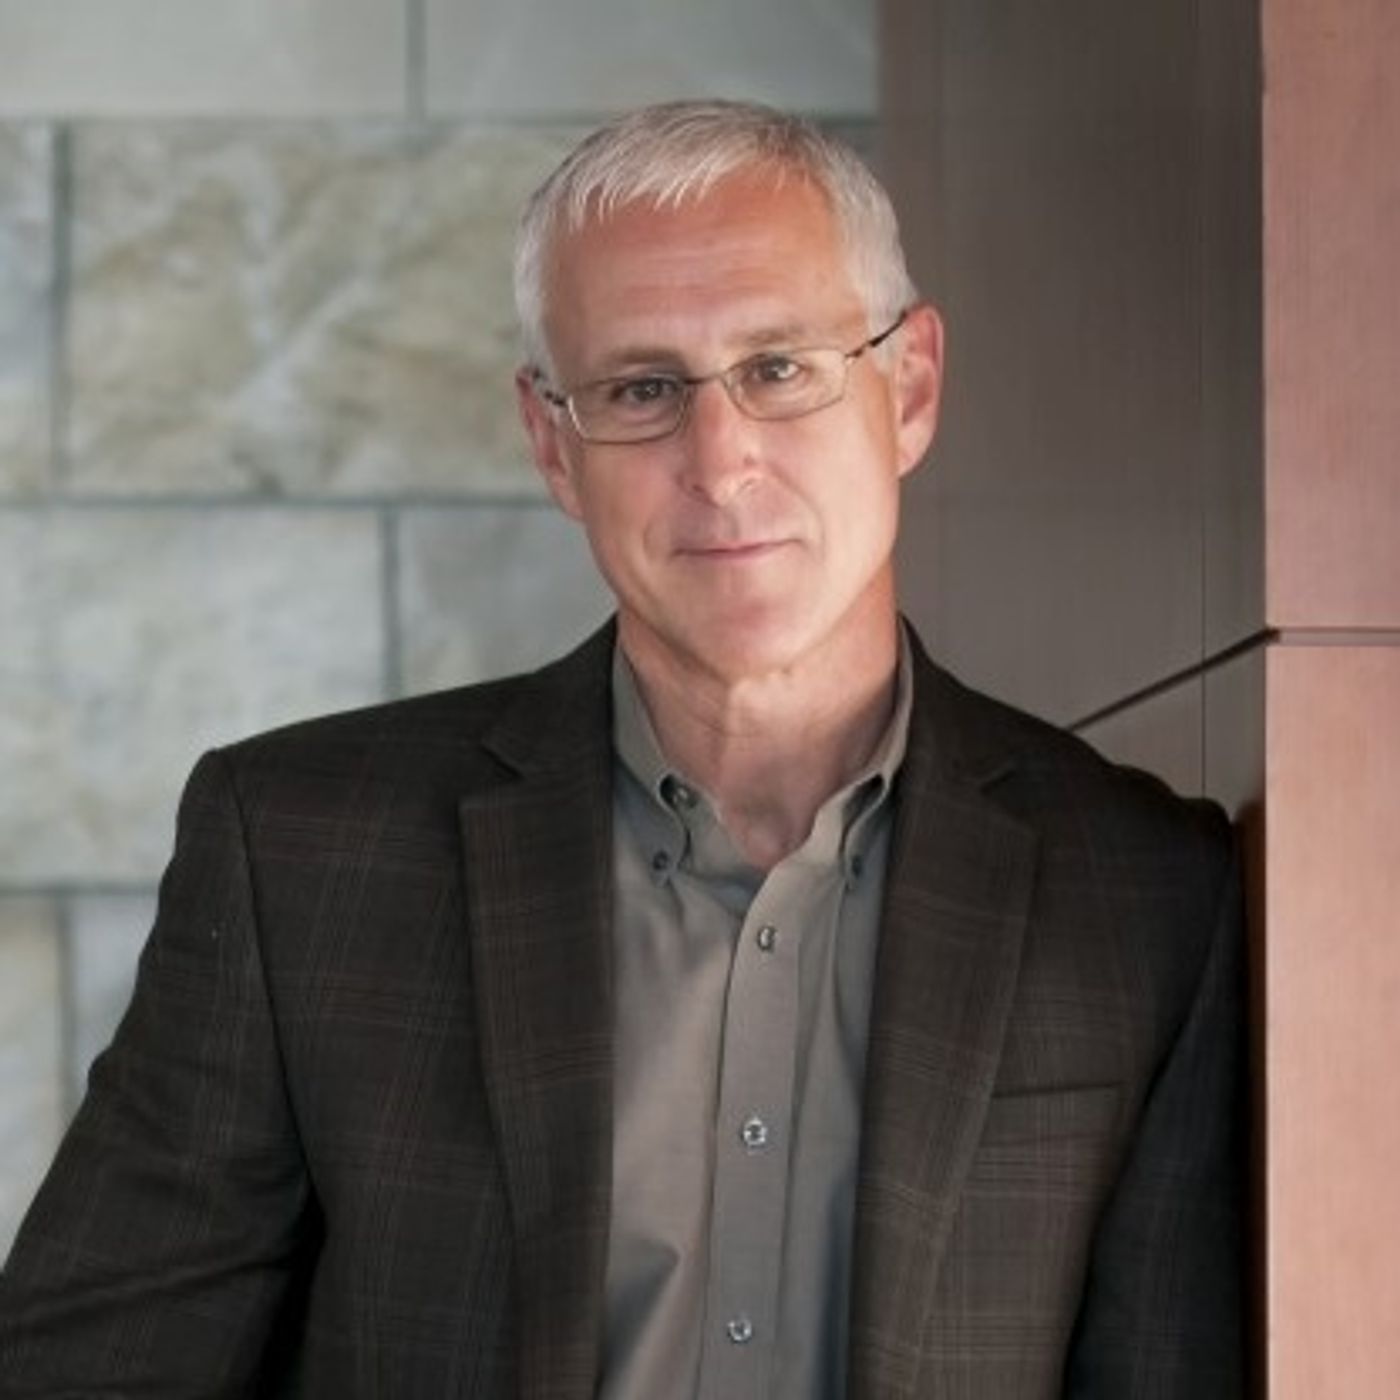 E103: J. Warner Wallace,  NBC Dateline featured cold-case homicide detective, popular national speaker/best-selling author